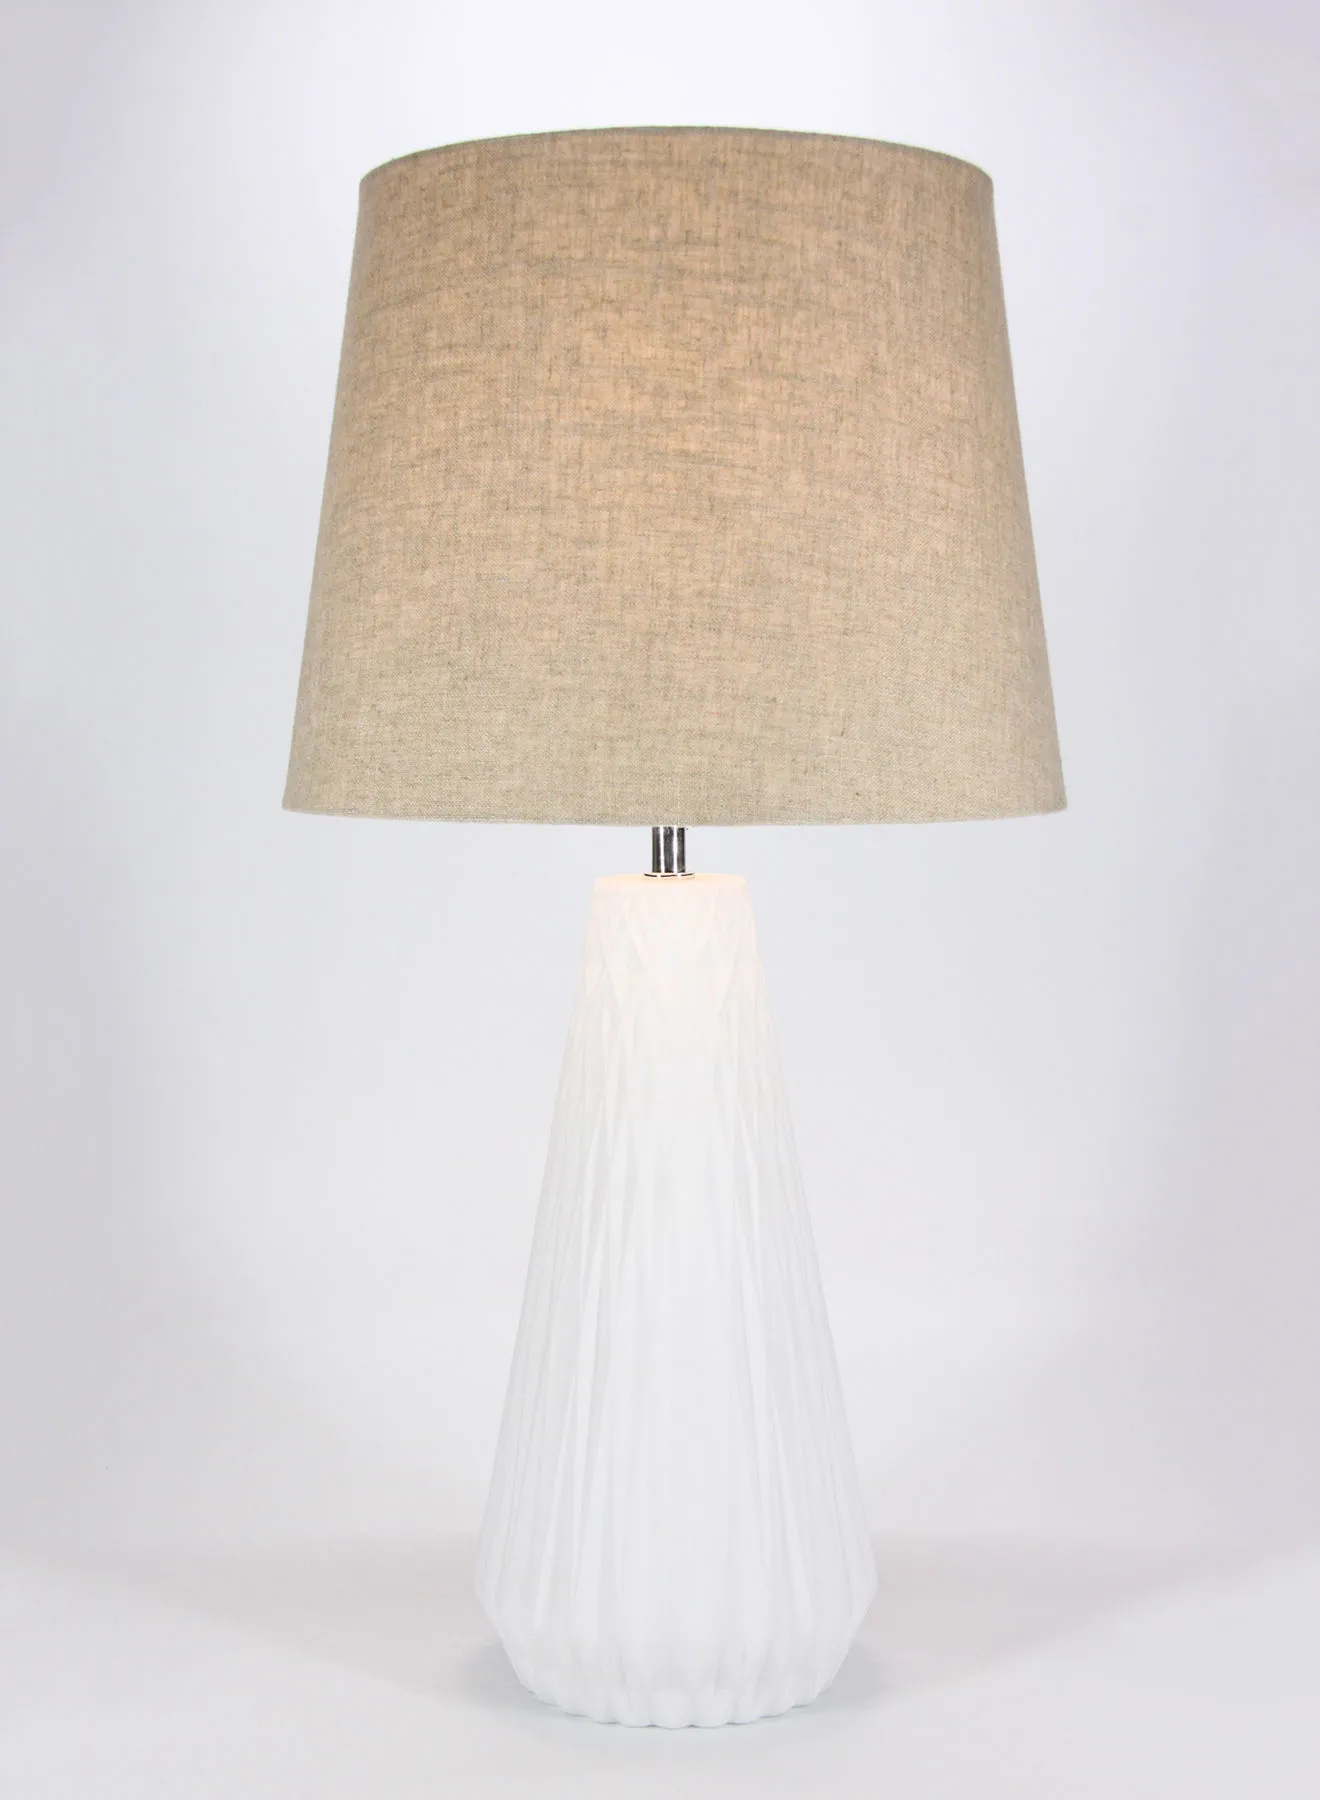 Switch Wanda Porcelain Table Lamp | Lampshade Unique Luxury Quality Material for the Perfect Stylish Home D152-53 White 36 x 36 x 69 White 36 x 36 x 69cm